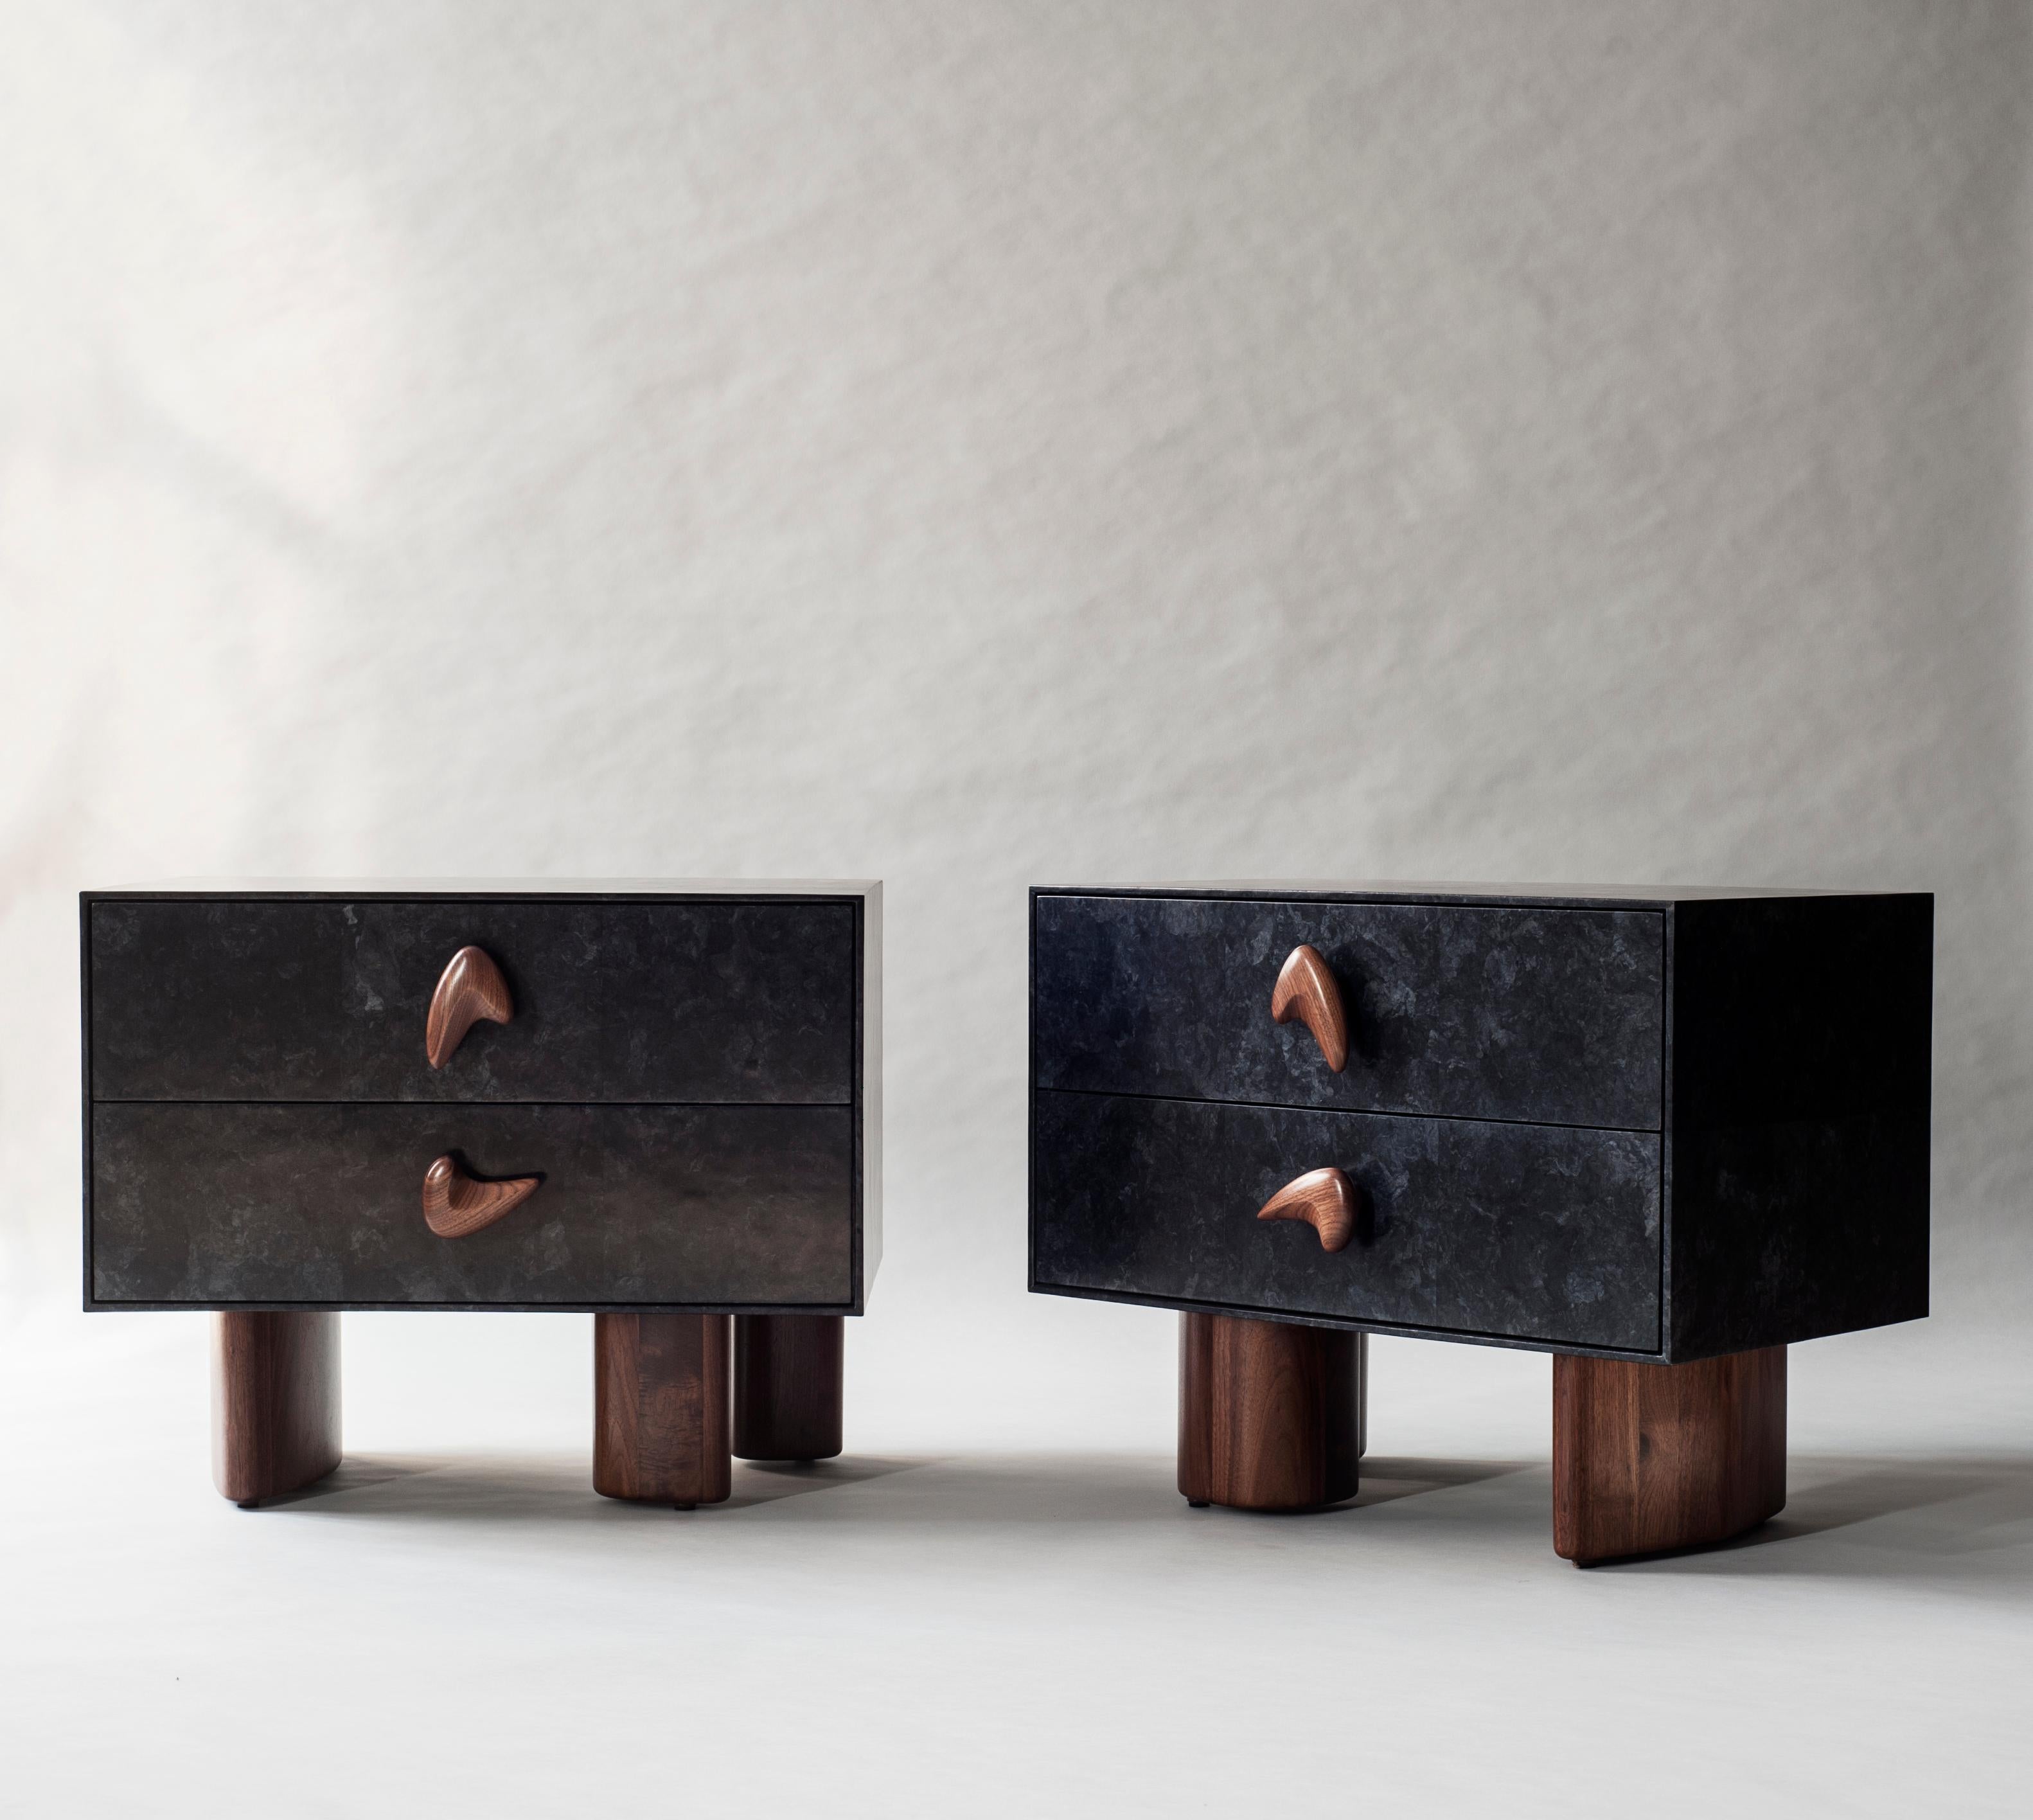 Set of 2 corbu bedside table by DeMuro Das 
Dimensions: W 76 x D 50.2 x H 61.5 cm
Materials: Solid walnut - Matte
 Carta (Coal) - Matte

Dimensions and finishes can be customized 

DeMuro Das is an international design firm and the aesthetic and